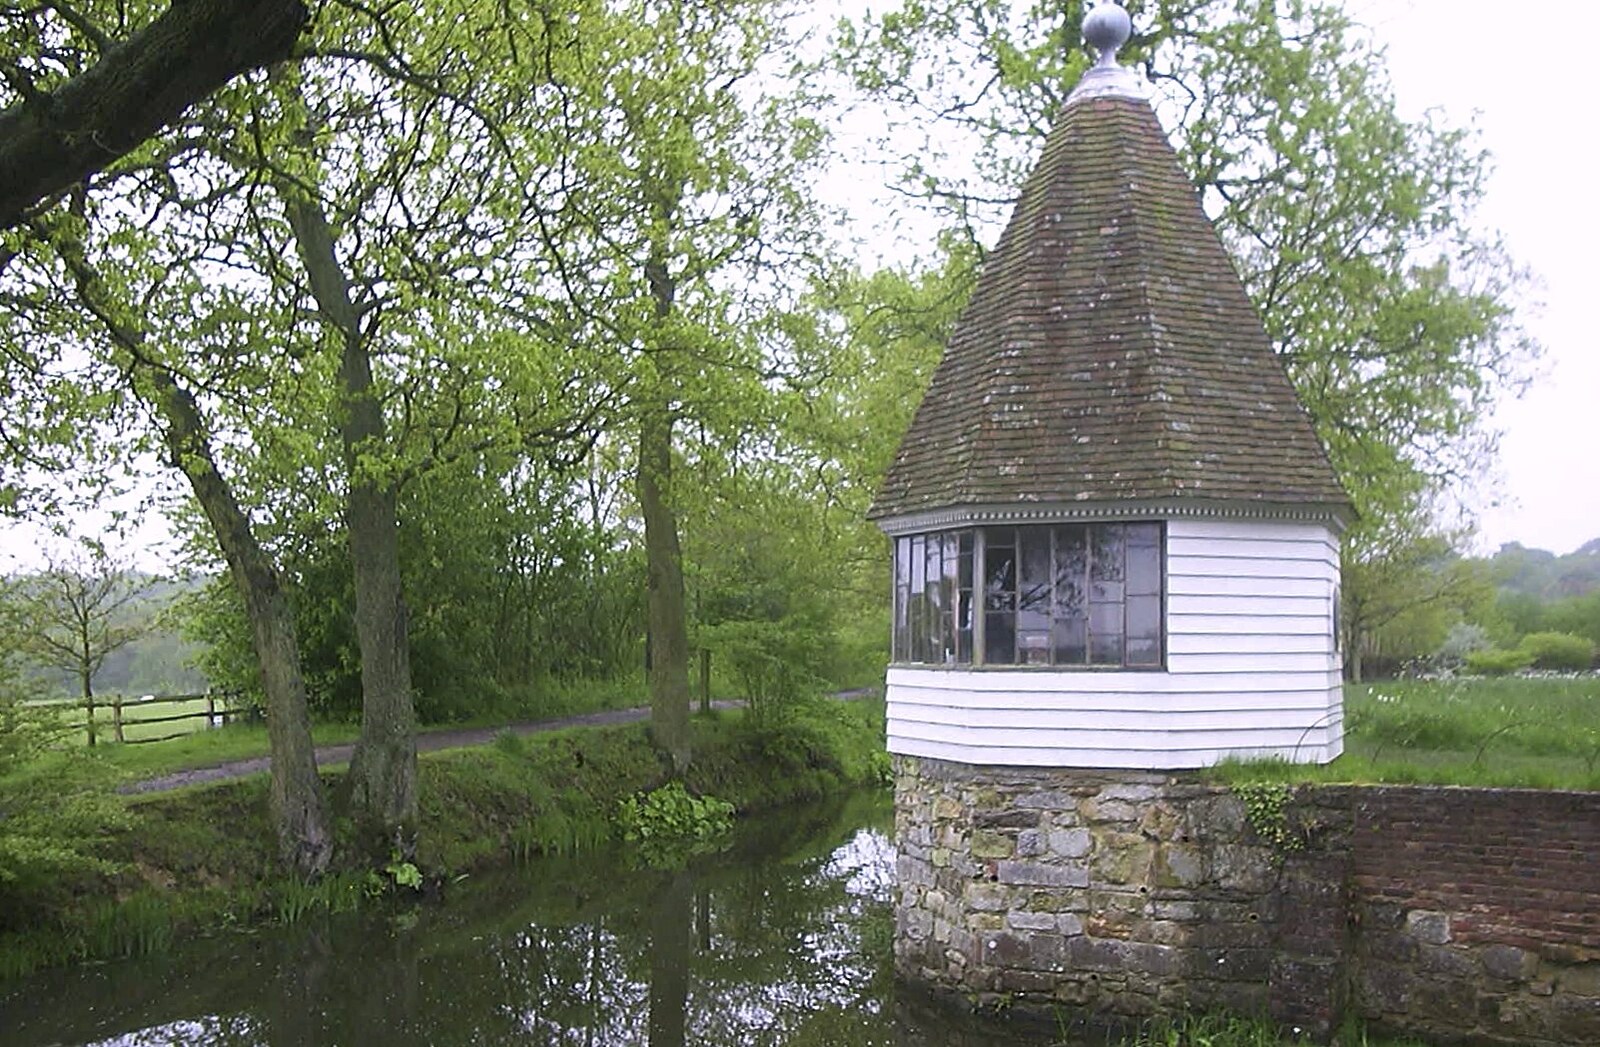 The BSCC Annual Bike Ride, Lenham, Kent - 8th May 2004: A curious octagonal summer house perched on the river